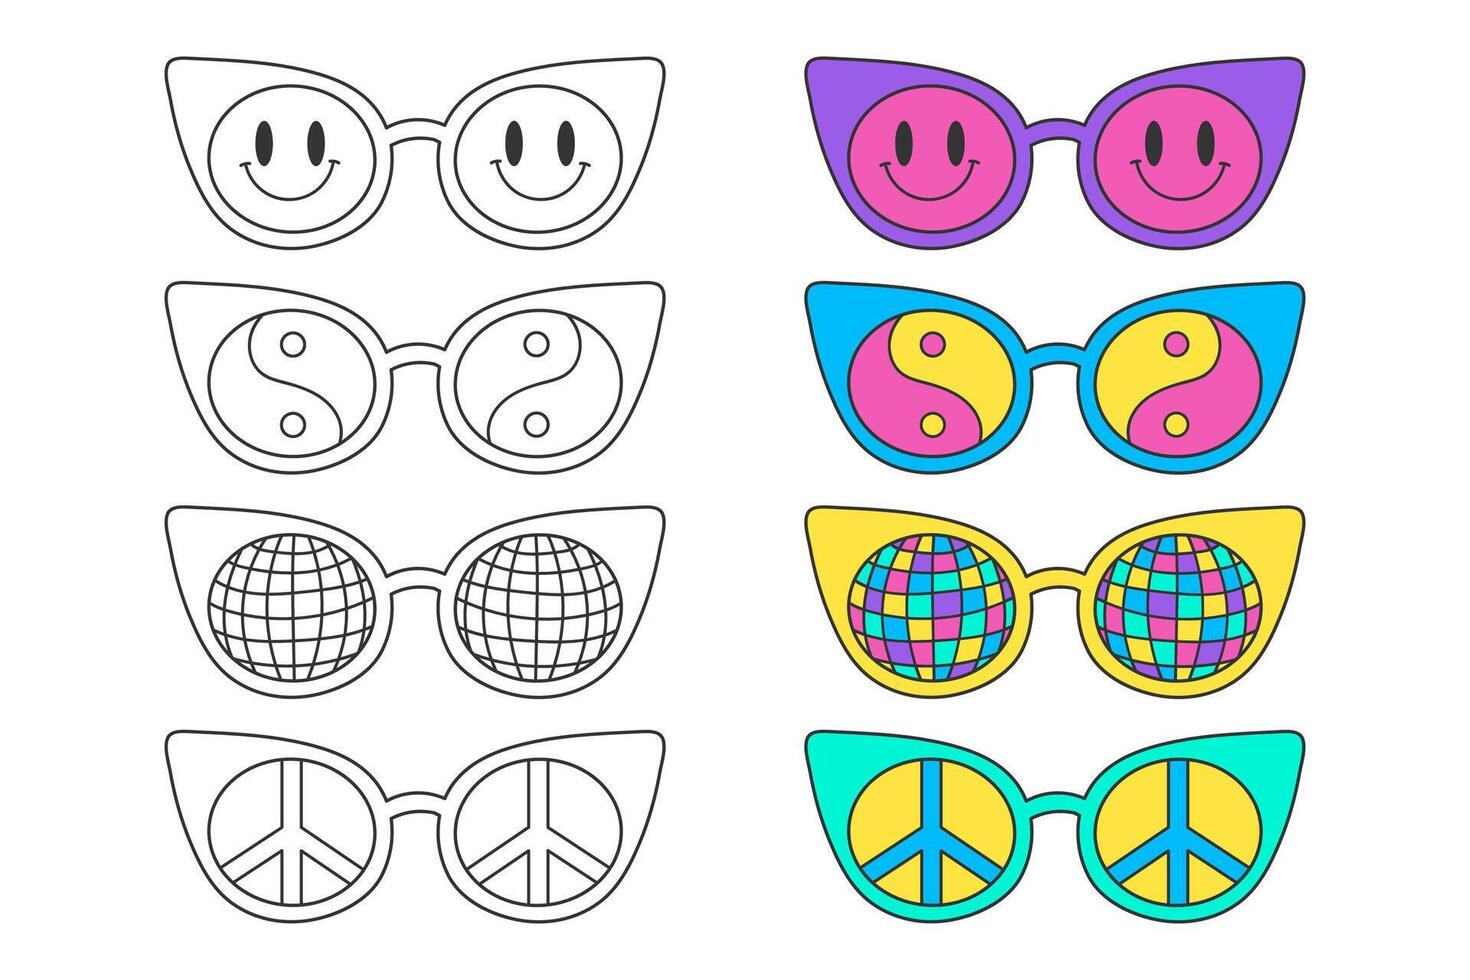 Cute coloring page, 70s style hippie sunglasses. Neon colors and outline doodle elements on a white background, a simple illustration for children. Print with peace sign, disco ball, smile, yin yang. vector